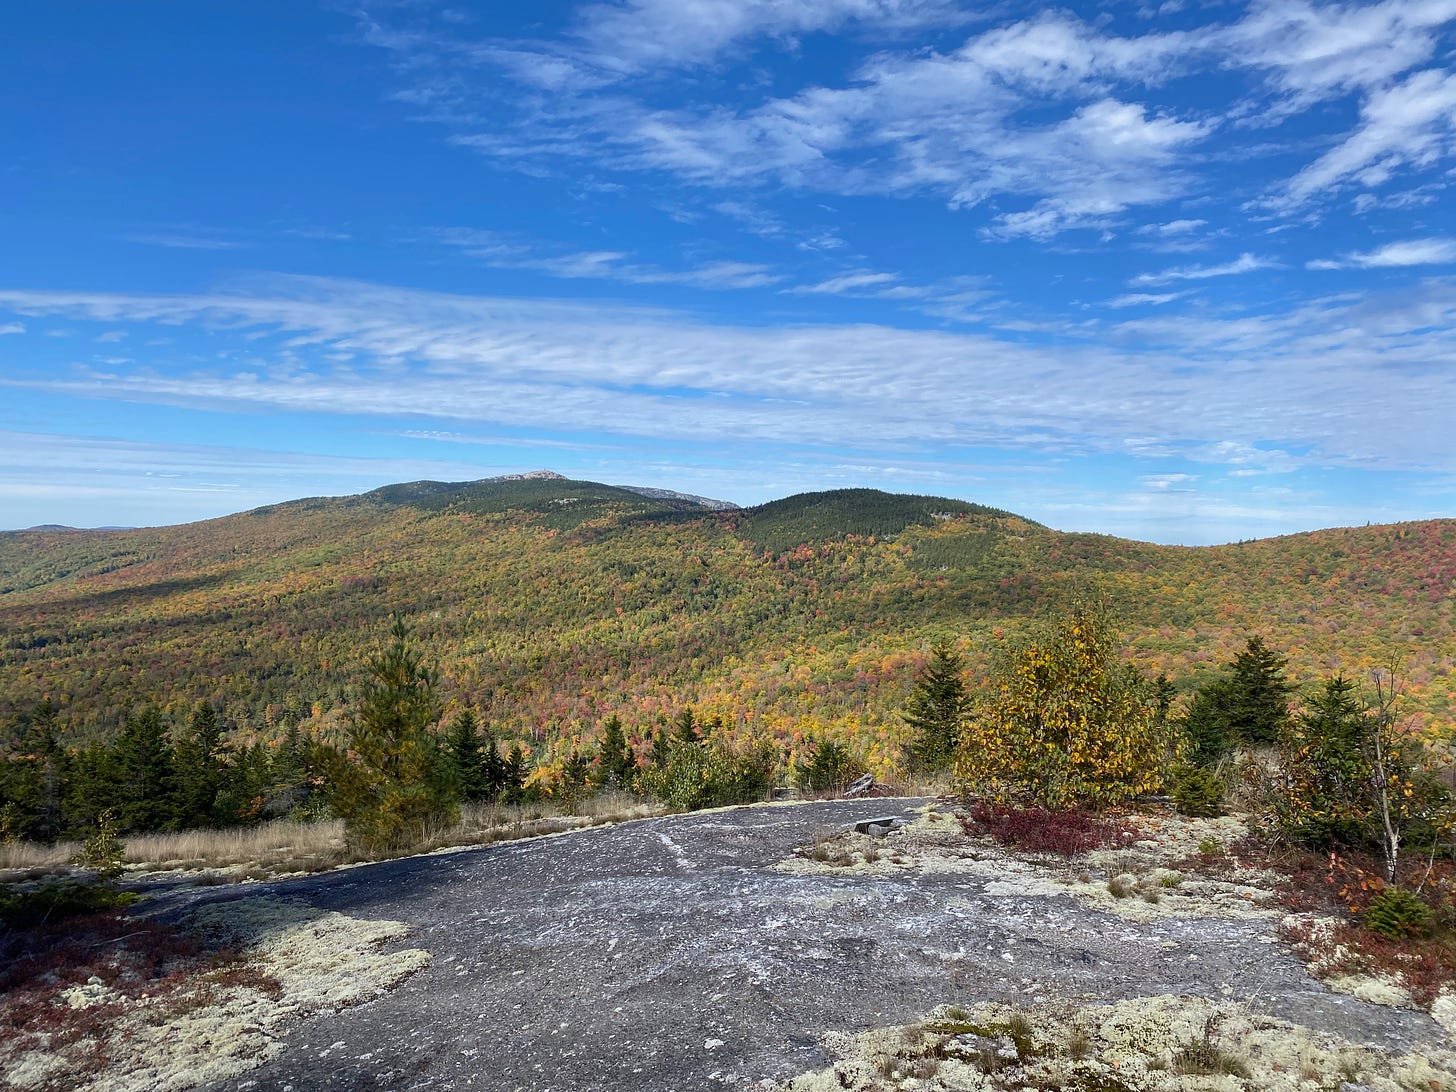 Vista of a mountain ridge under a bright blue sky dotted with clouds. The forested mountain slopes are a mixture of green, red, orange, and gold.